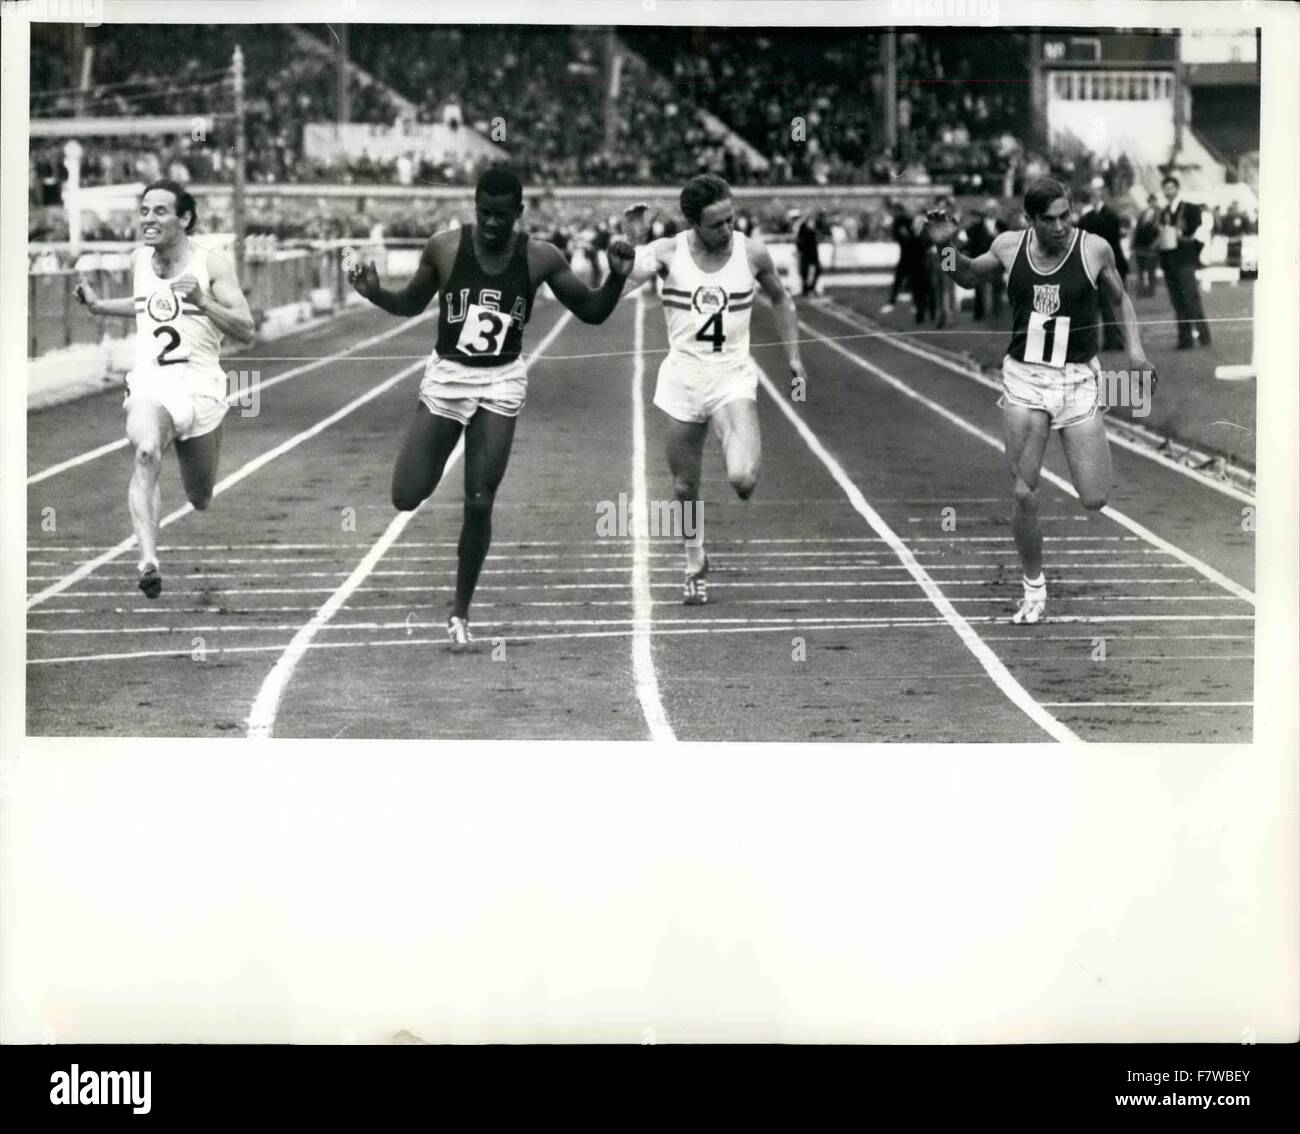 1965 - Finish of the 400 metres Vincent Matthews (No.3) of Queens, New York, breaks the tape to win the 400 metres race in the Great Britain V. United States Athletics RA meeting at the White City Stadium, London, today, August 12. Matthews won in a time of 45.7 seconds with Lee Evans of Madara, California (No.1) coming second in a time of 46.7 seconds, third was Colin Campbell (No.2) of Britain in a time of 47.6 seconds and fourth was Jim Robertson (No.4) of Britain in a time of 48.0 seconds. © Keystone Pictures USA/ZUMAPRESS.com/Alamy Live News Stock Photo